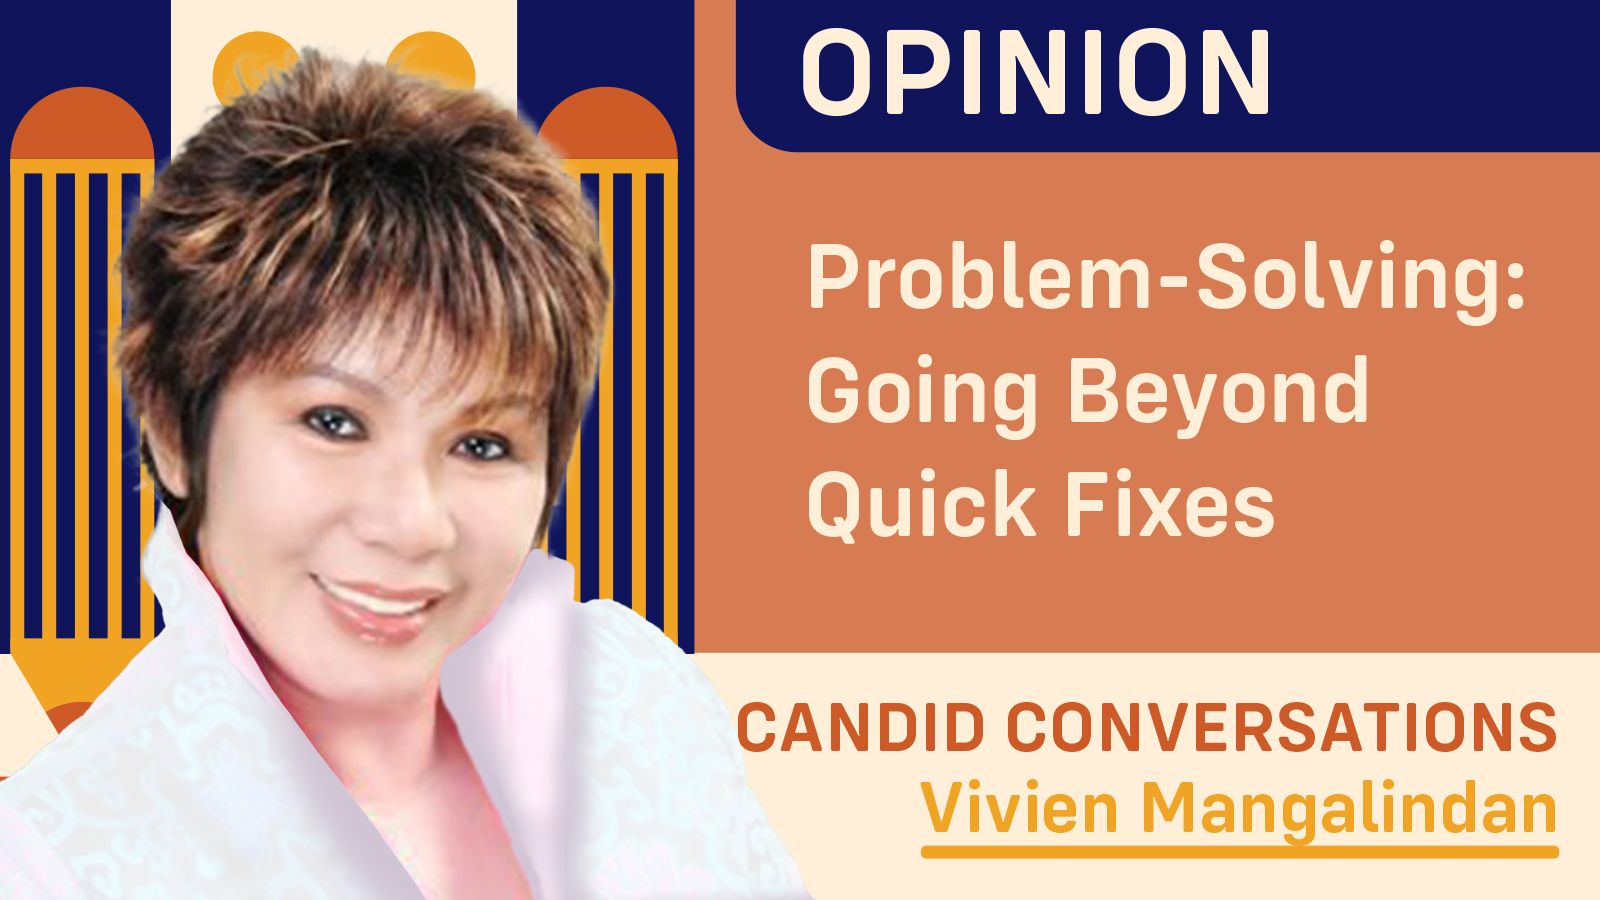 Problem-Solving: Going Beyond Quick Fixes